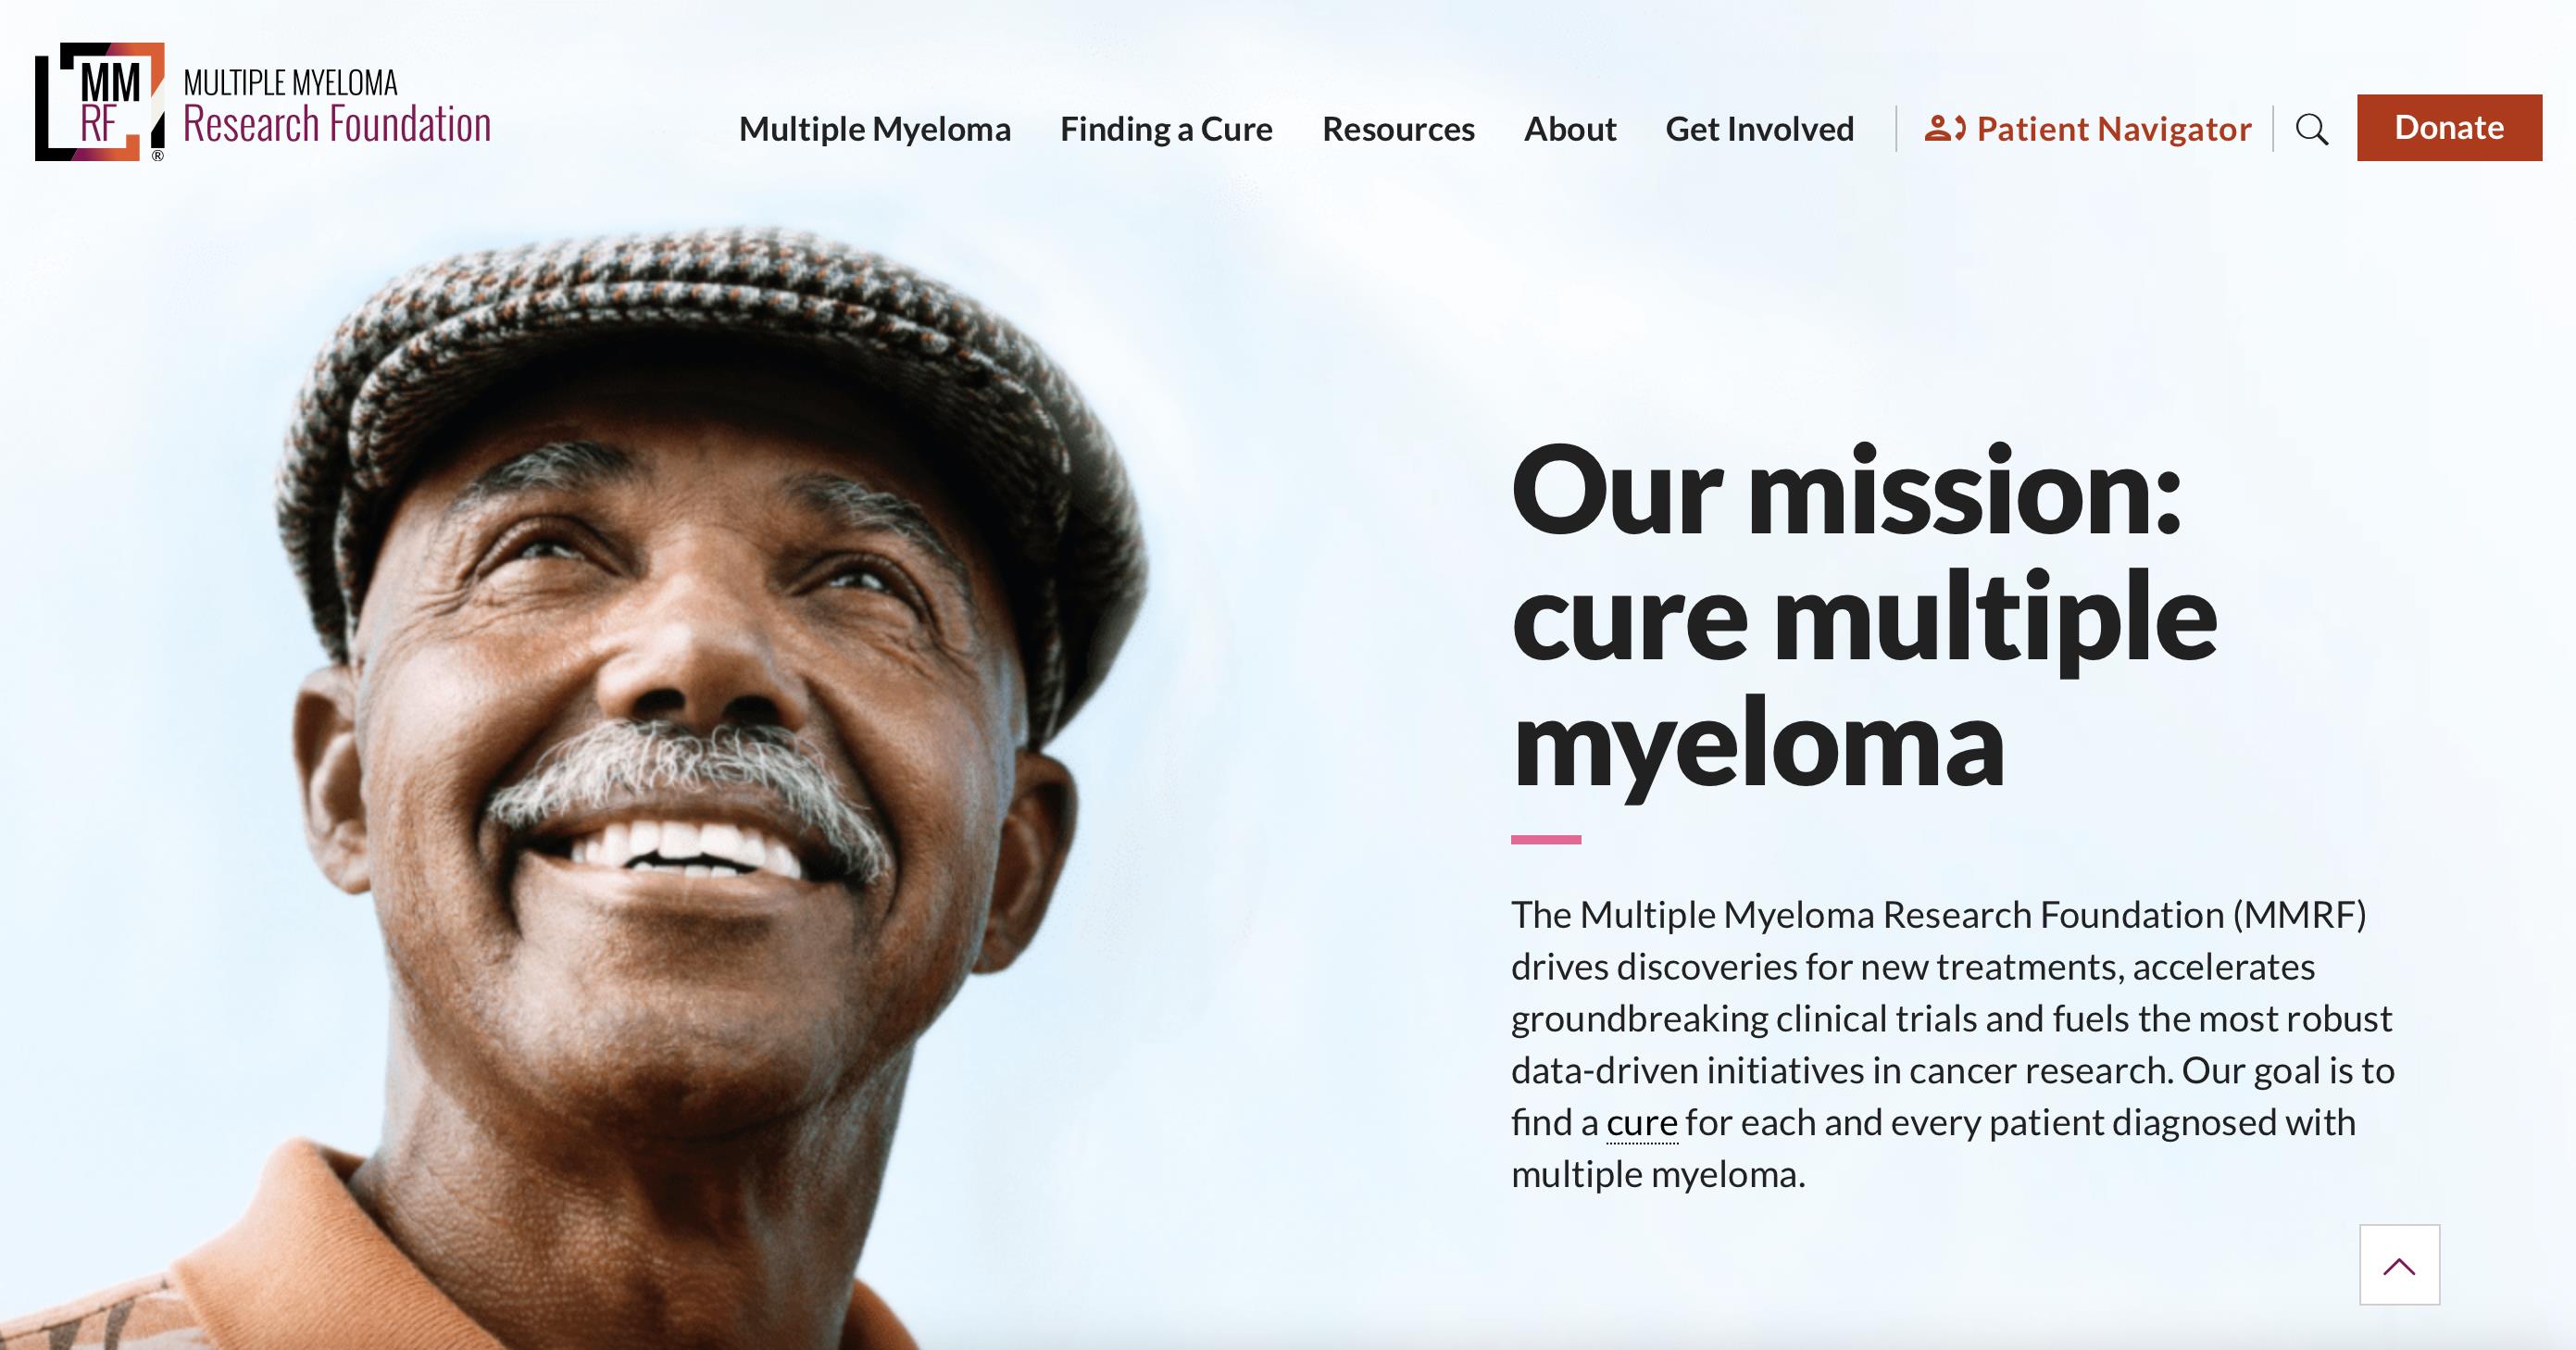 Springbox, a Prophet company wins 2021 WebAward for Multiple Myeloma Research Foundation Website